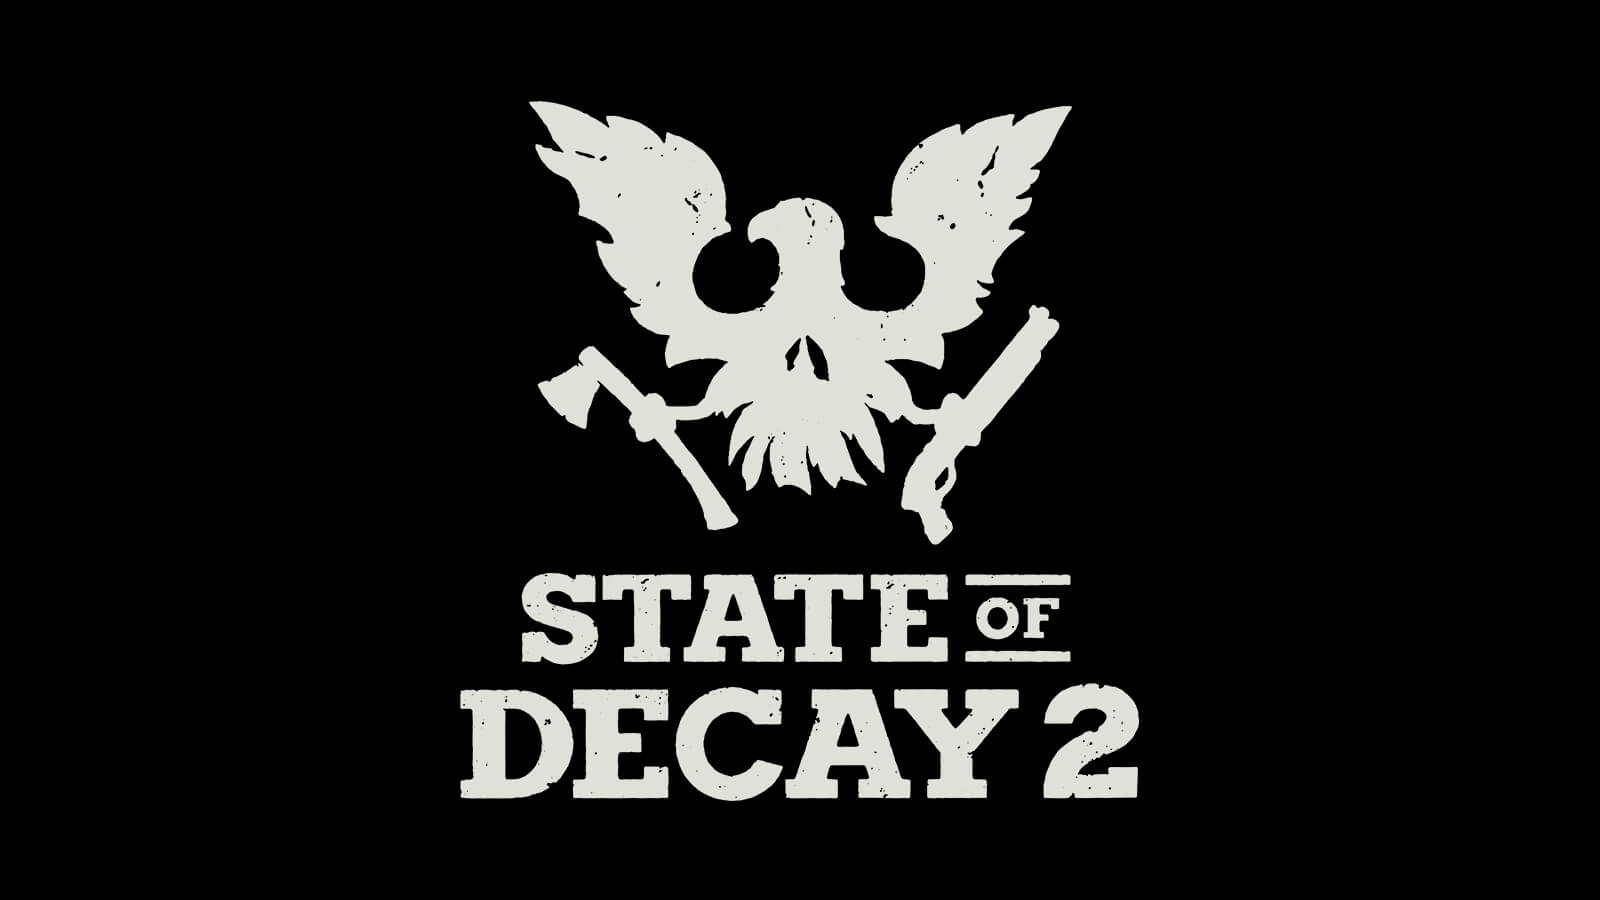 State of Decay 2: Update 33: Heart Attack : r/Games